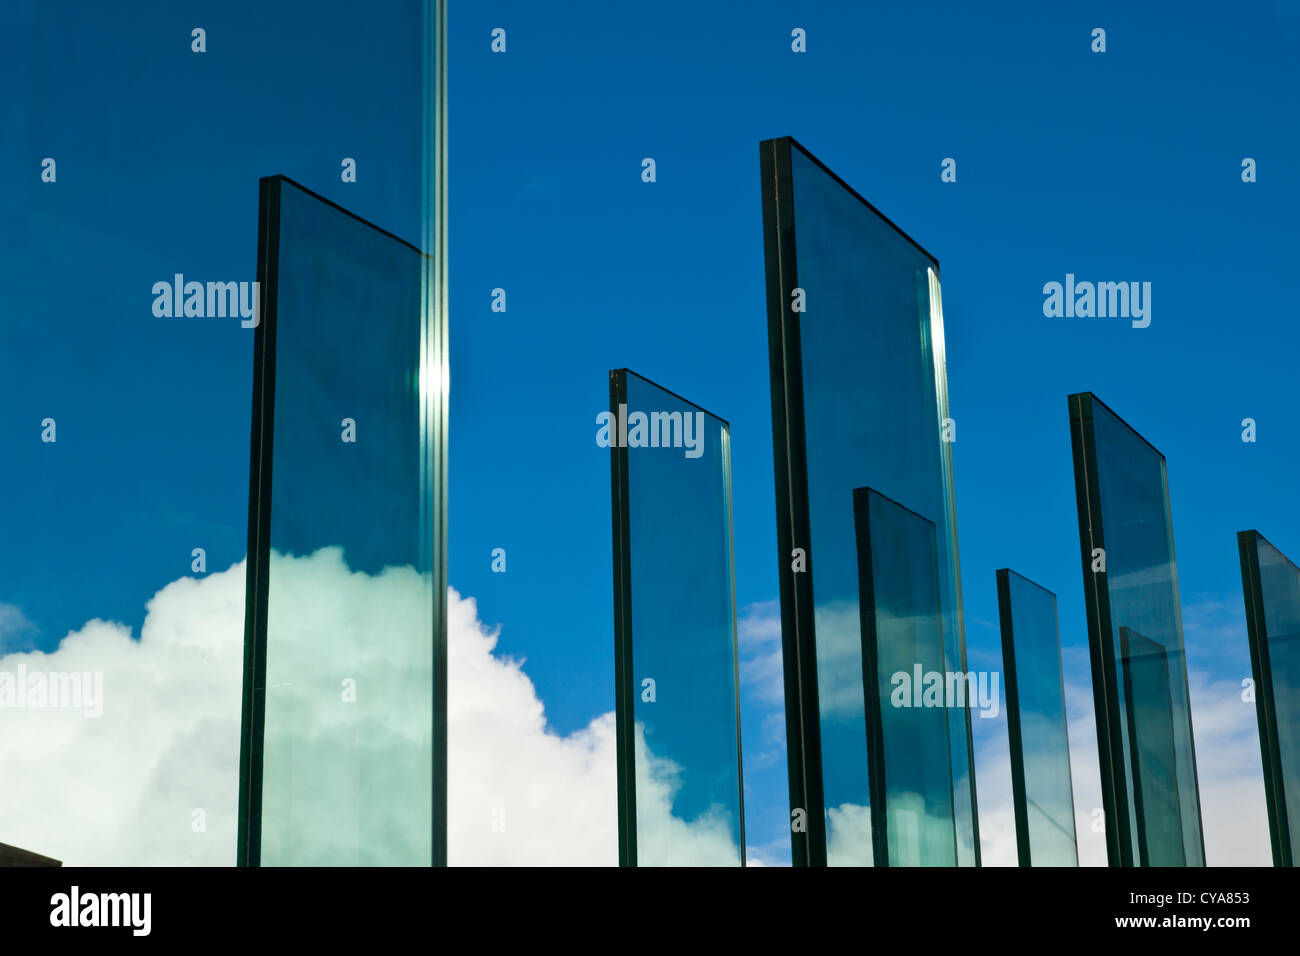 Glass panels used within modern architecture of office building design. Stock Photo